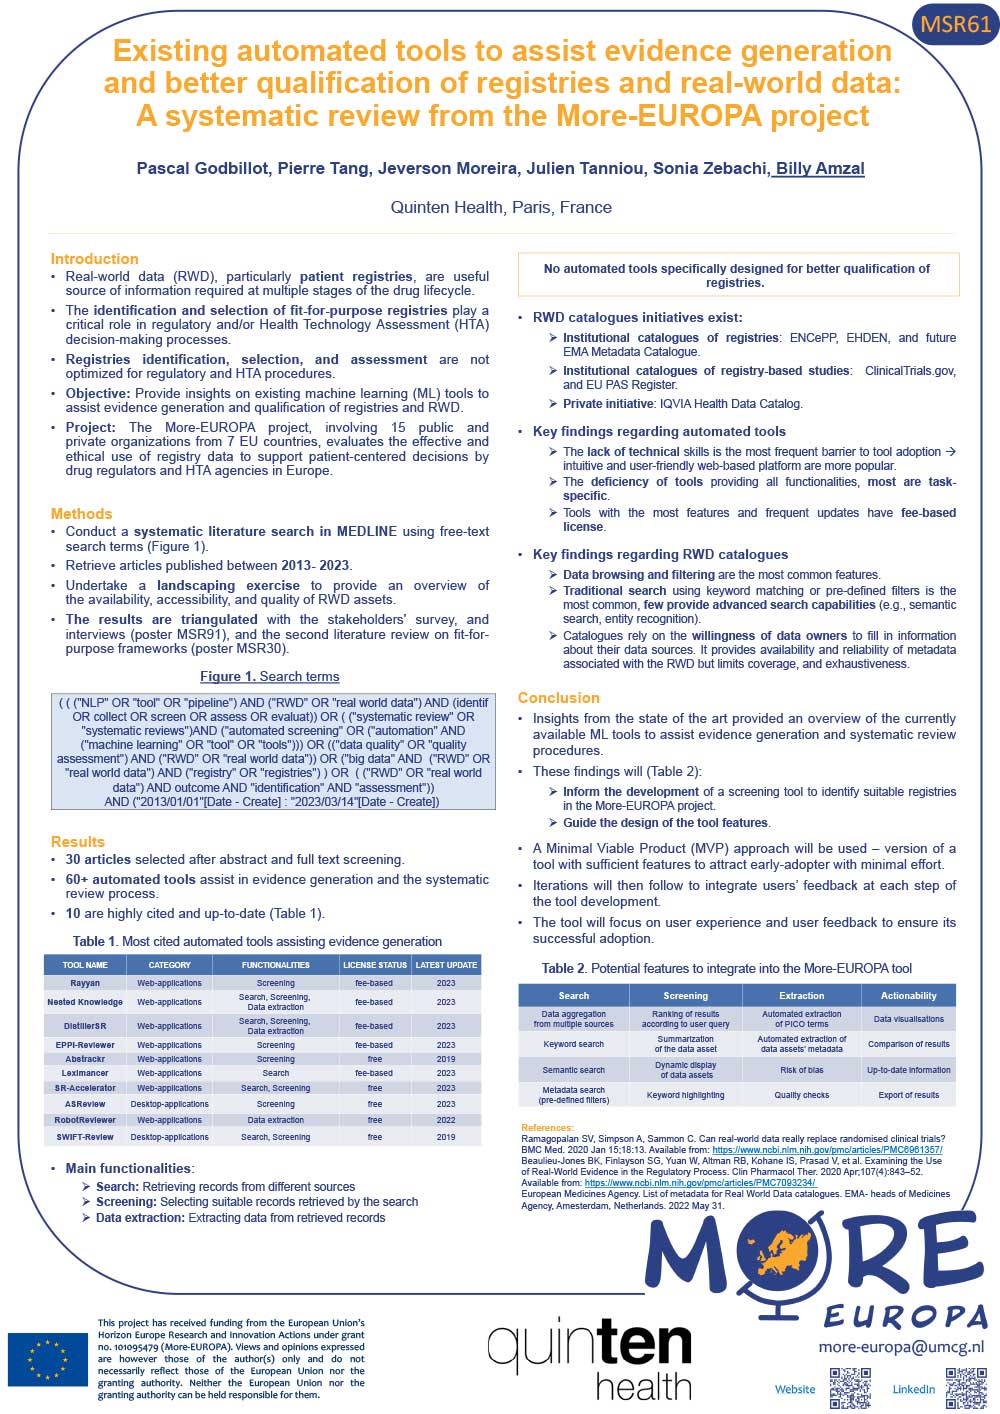 Visual of the poster entitled "Existing automated tools to assist evidence generation and better qualification of registries and real-world data. A systematic review from the More-EUROPA project."